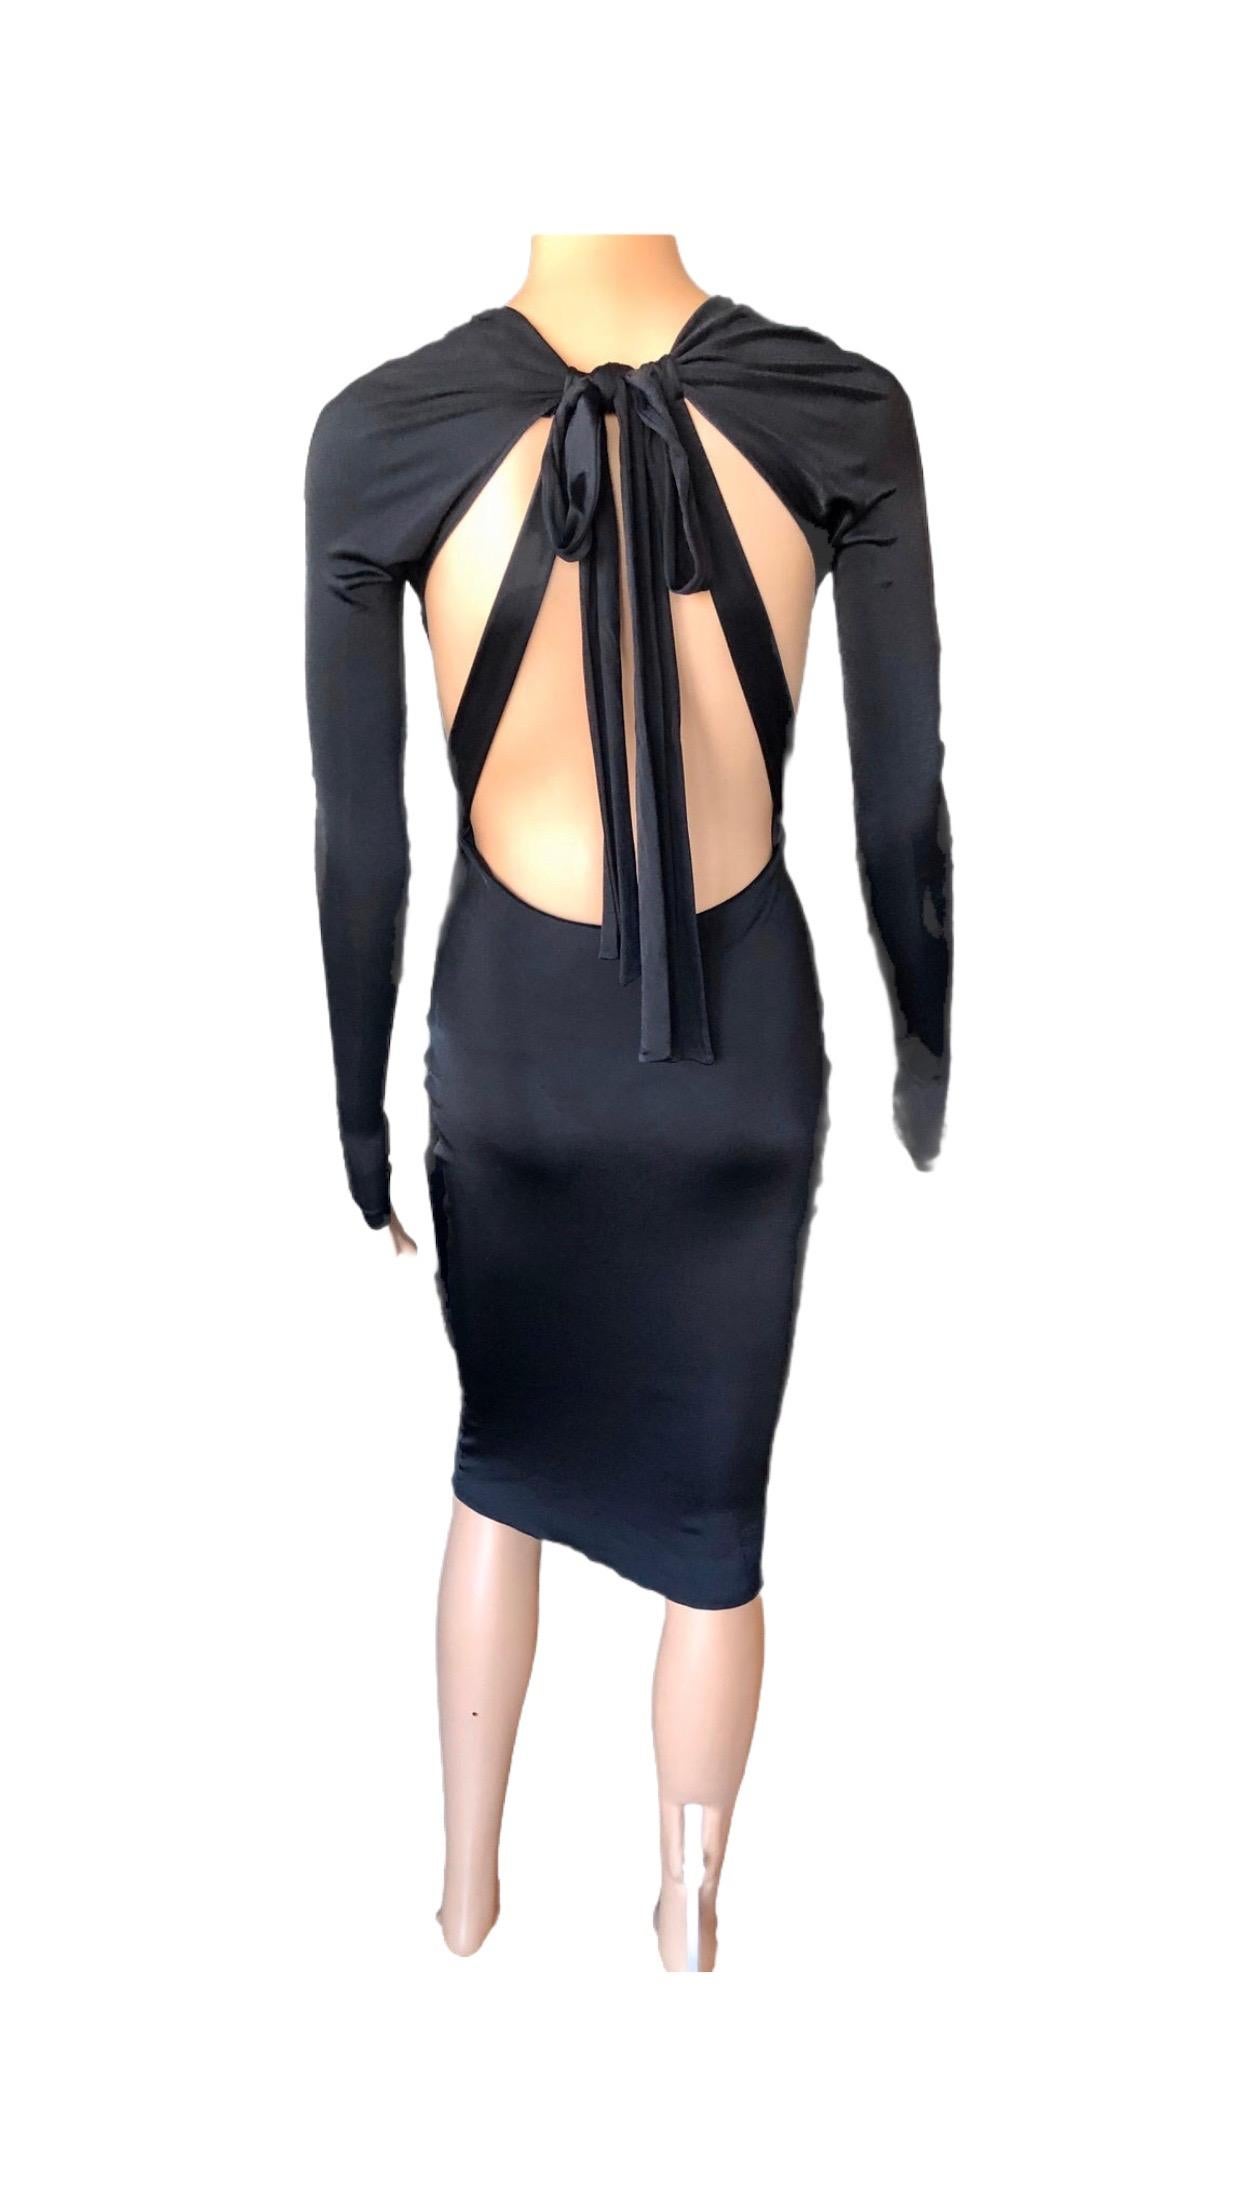 Gucci S/S 2005 Tom Ford Plunging Cutout Backless Bodycon Black Dress For Sale 11